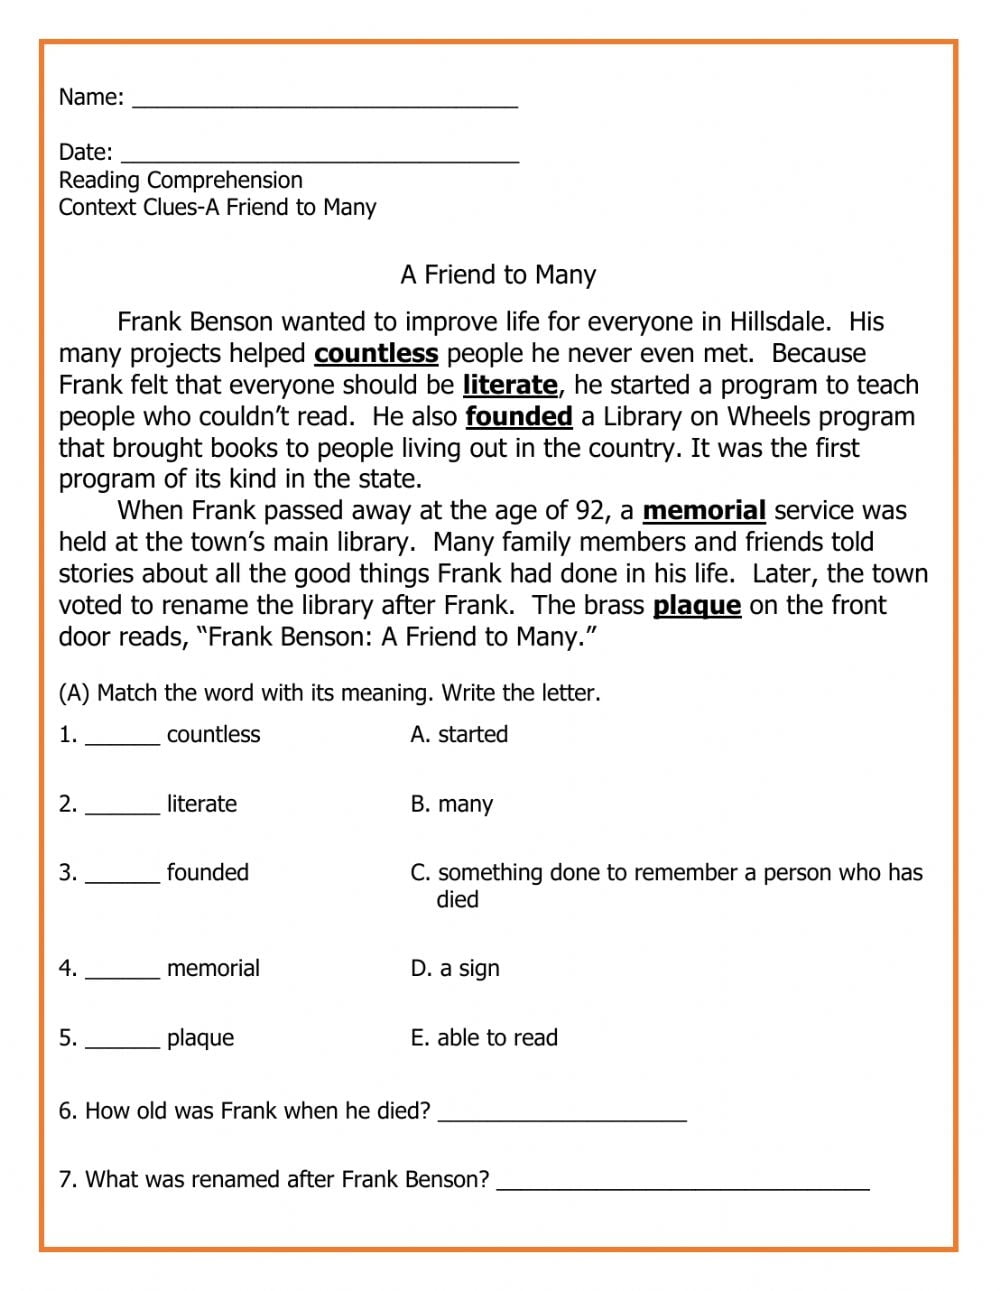 Context Clues Worksheet For 6